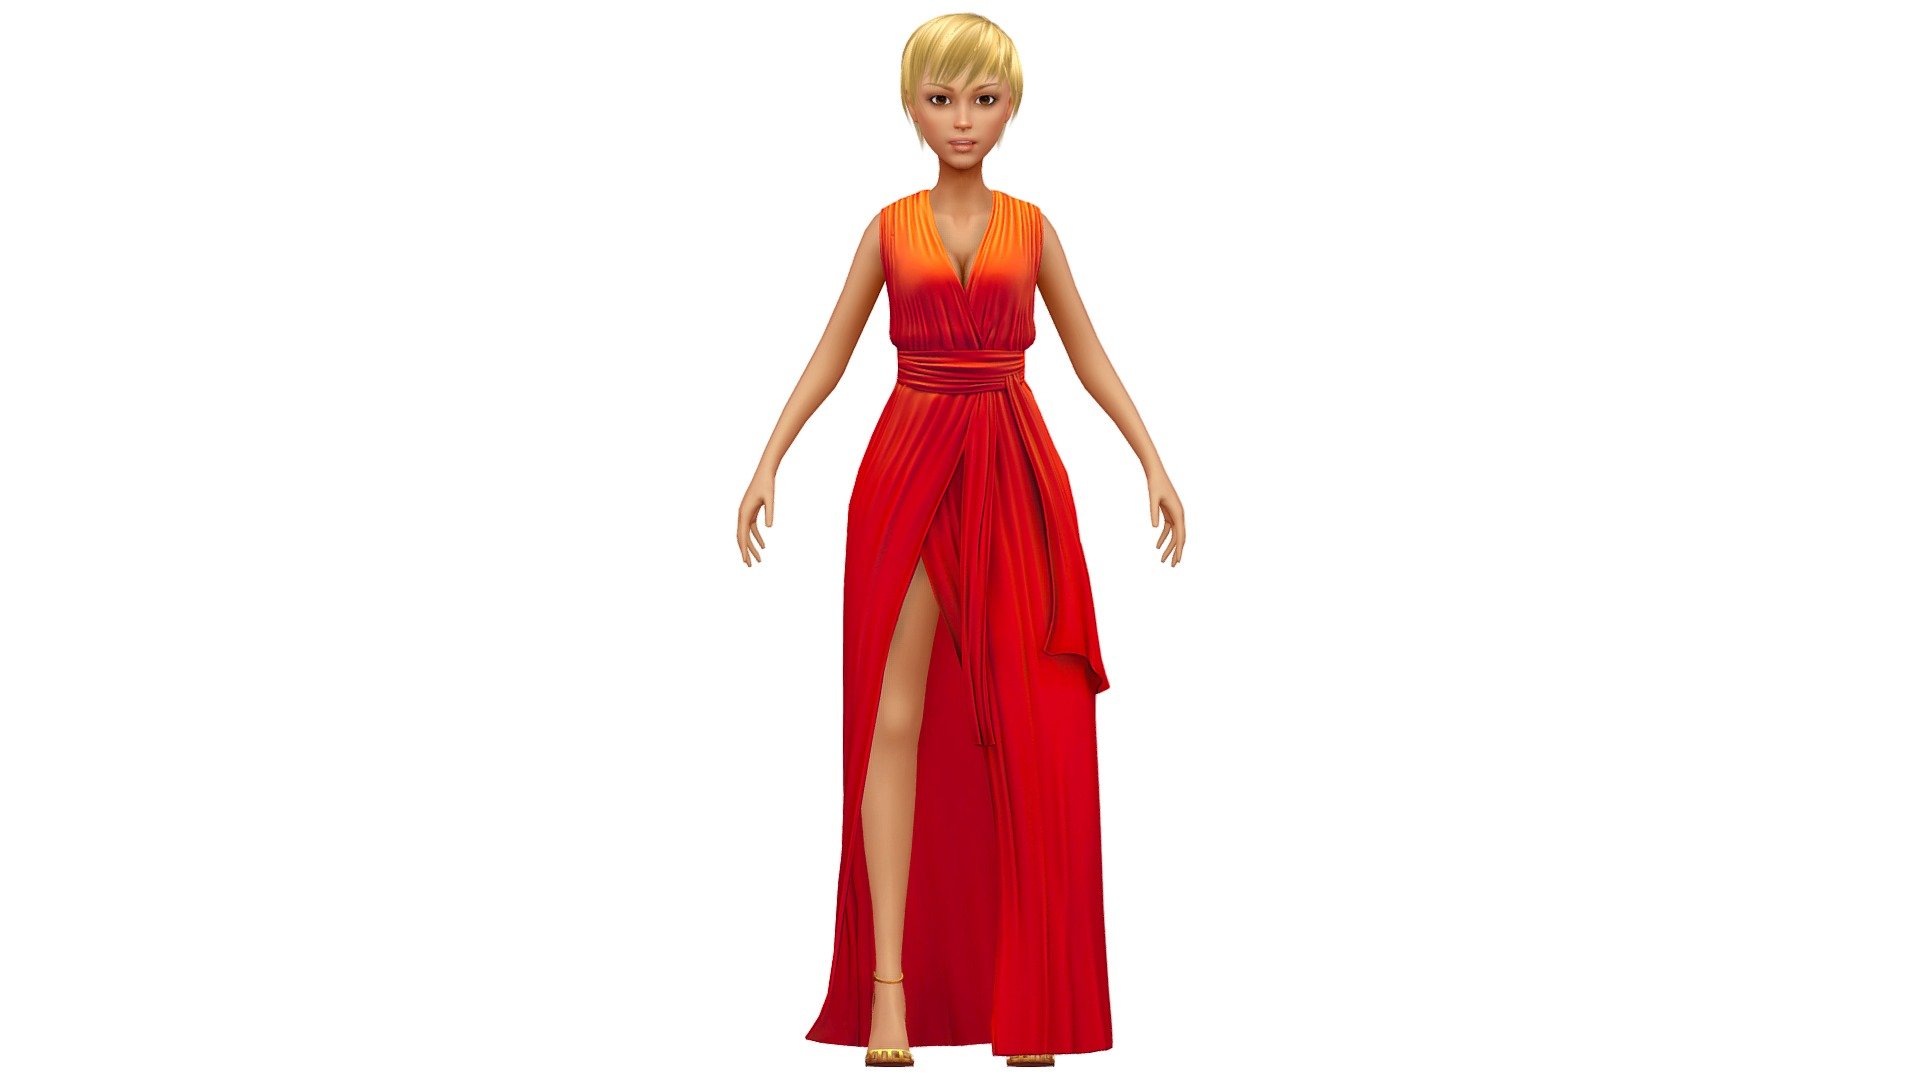 you can combine and match other combinations using the collection:

hair collection - https://skfb.ly/ovqTn

clotch collection - https://skfb.ly/ovqT7

lowpoly avatar collection - https://skfb.ly/ovqTu - Cartoon Style Low Poly Red Dress Girl Avatar - Buy Royalty Free 3D model by Oleg Shuldiakov (@olegshuldiakov) 3d model